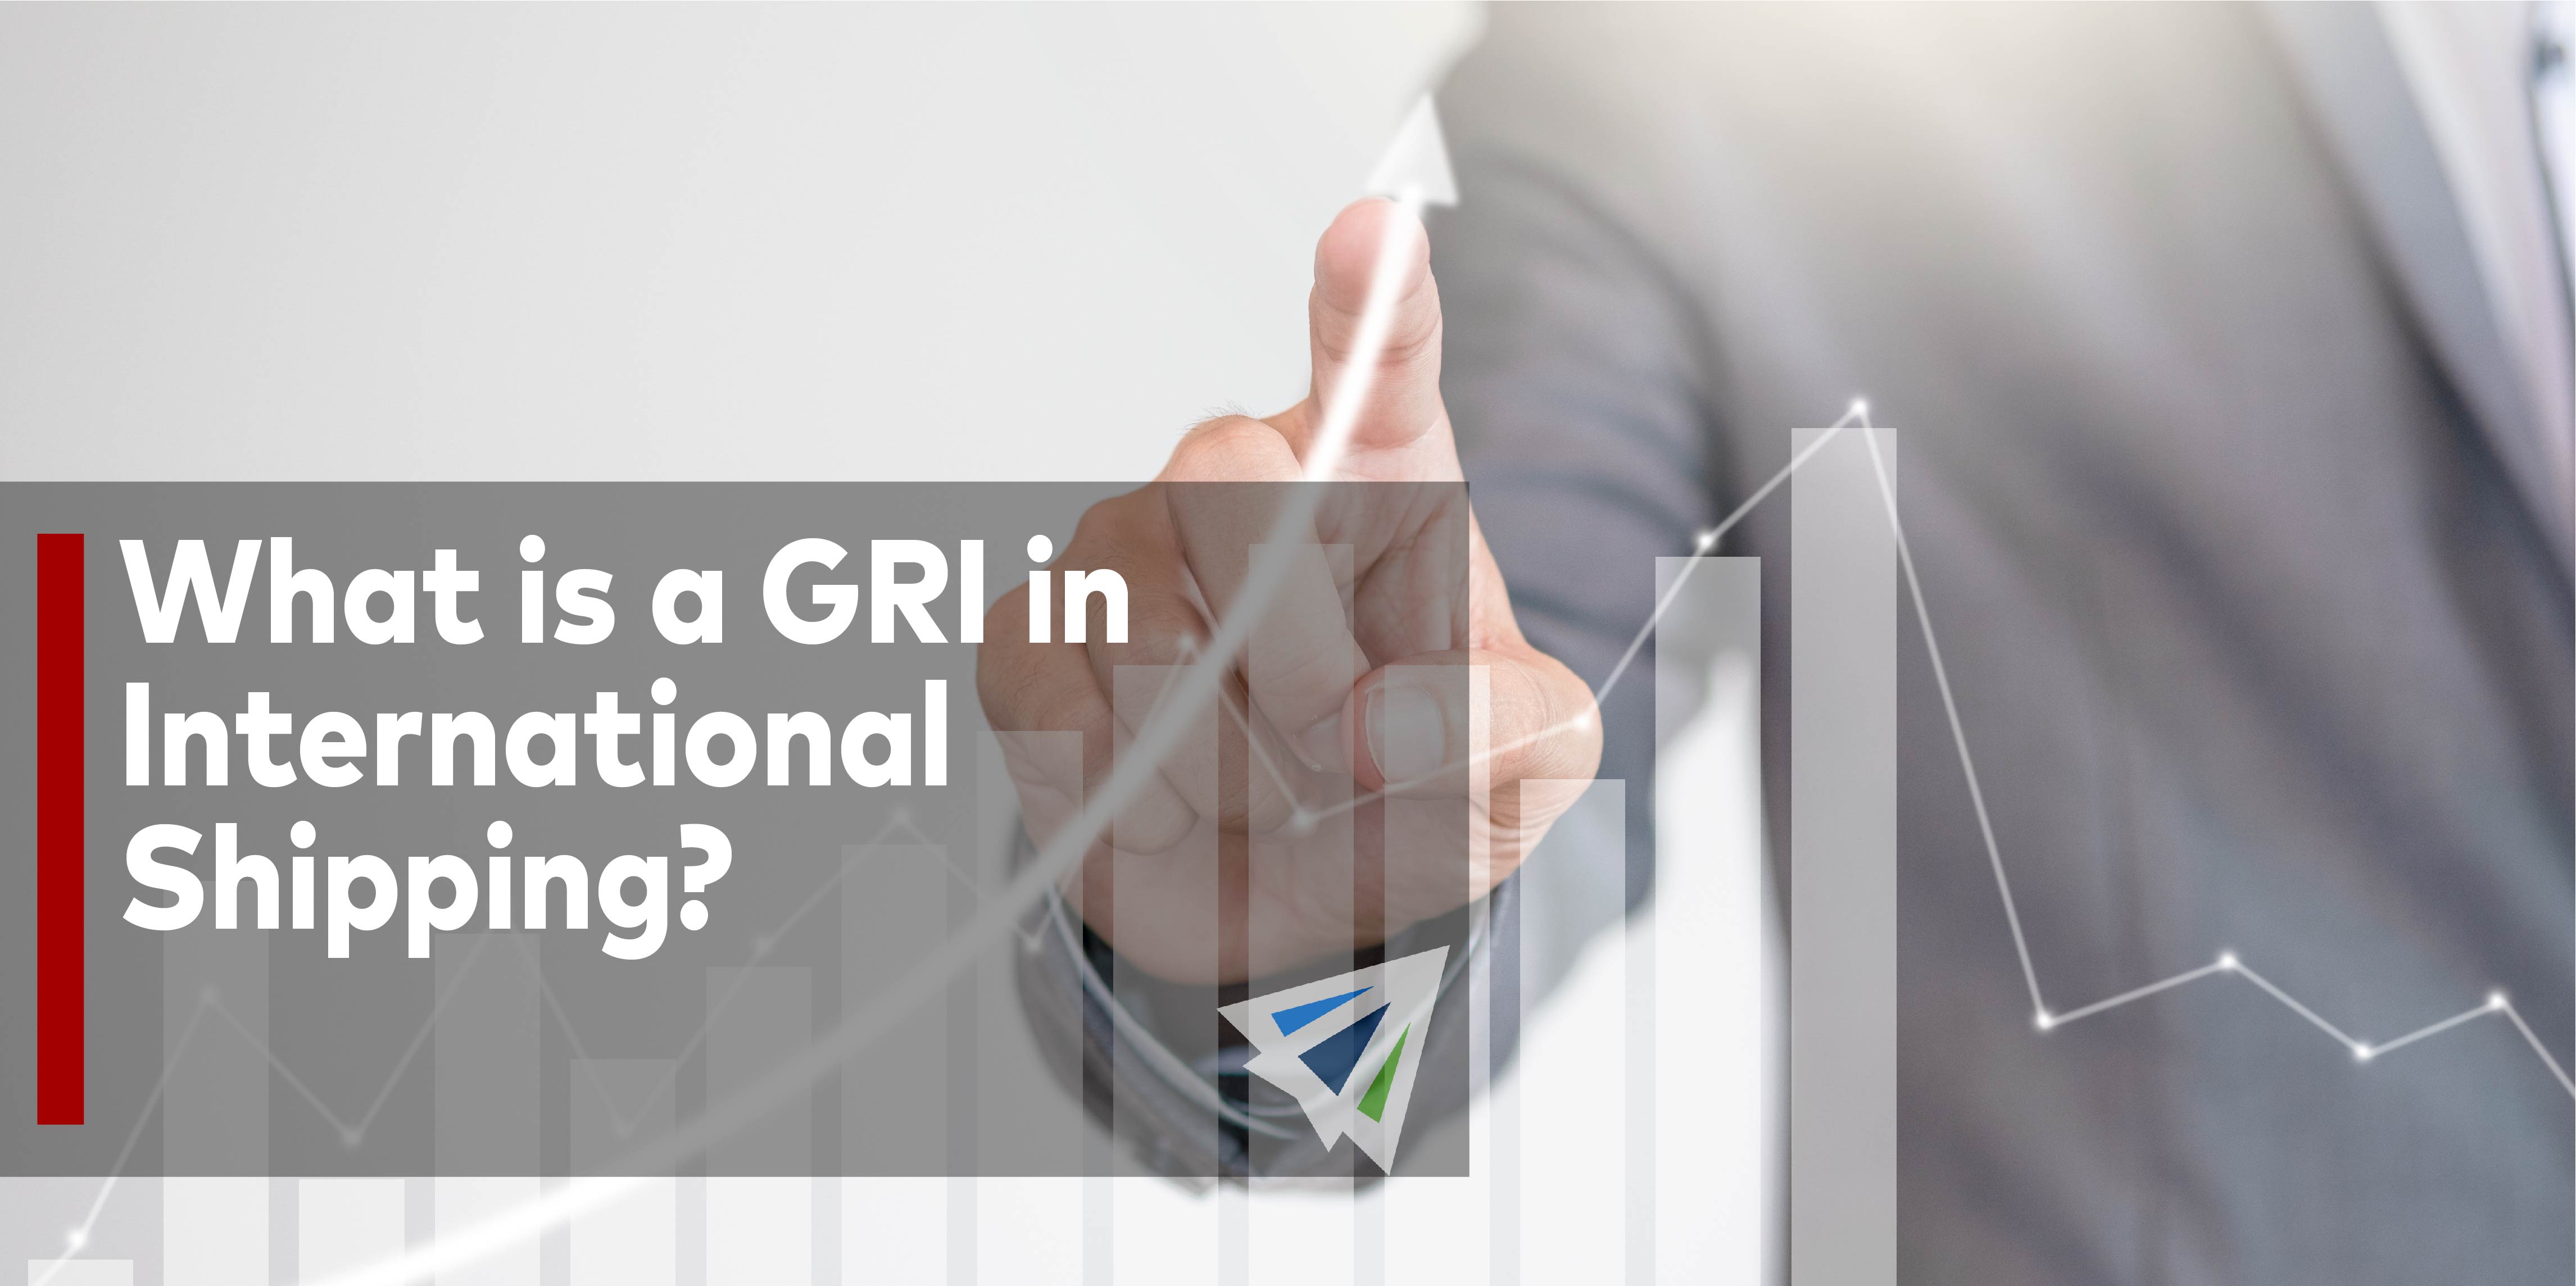 What is a GRI in International Shipping